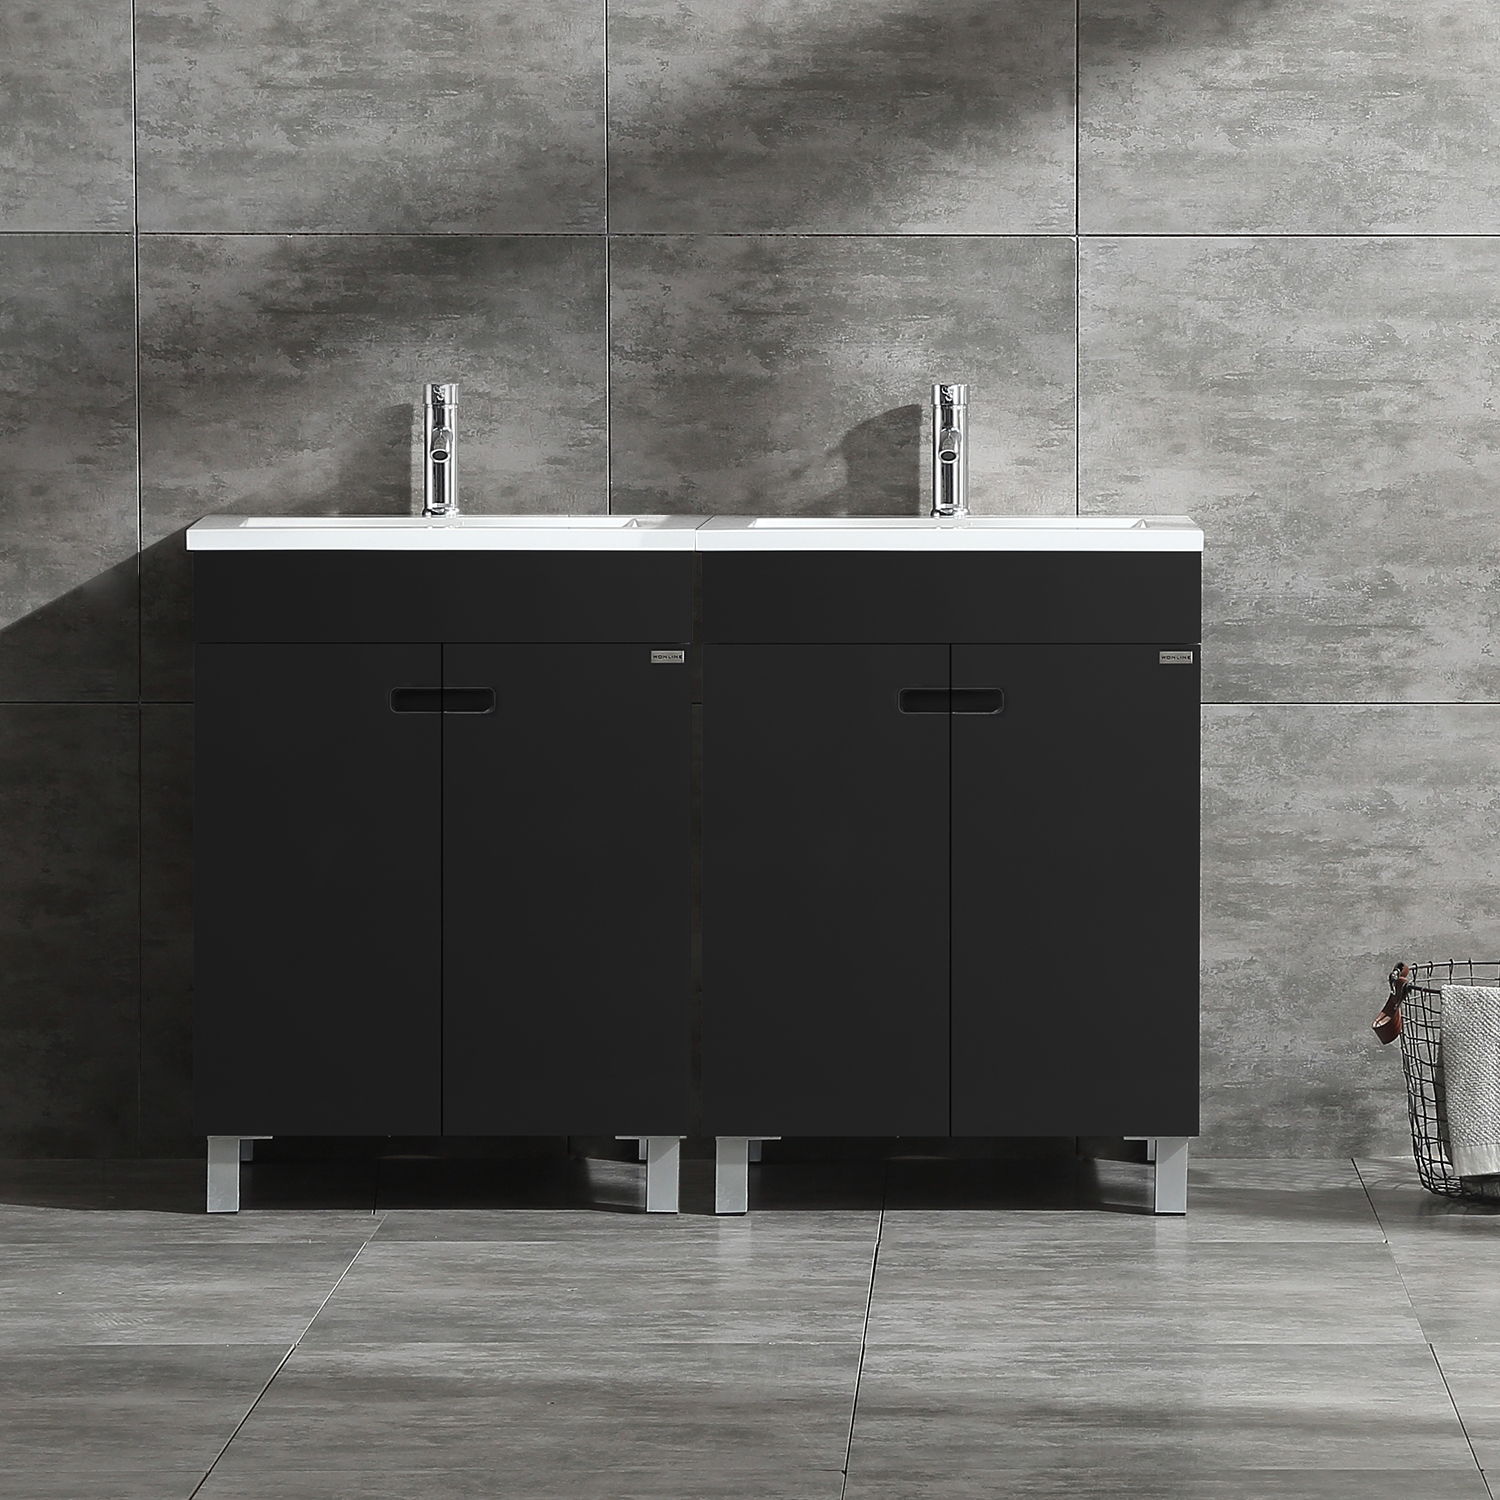 Details About 48 Modern Bathroom Vanity Cabinet Double Sink With Faucet Combo Black Mdf Wood